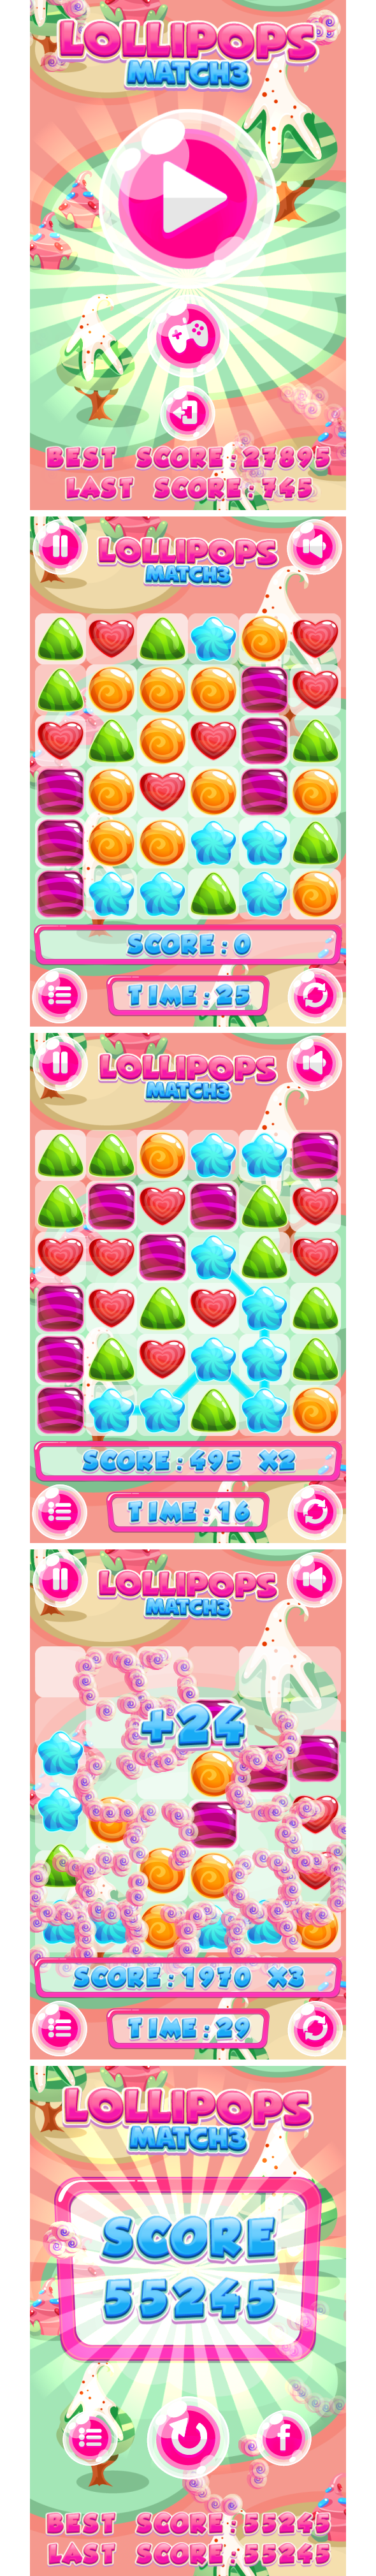 Lollipops Match3 - HTML5 Game + Mobile game! (Construct 3 | Construct 2 | Capx) - 3